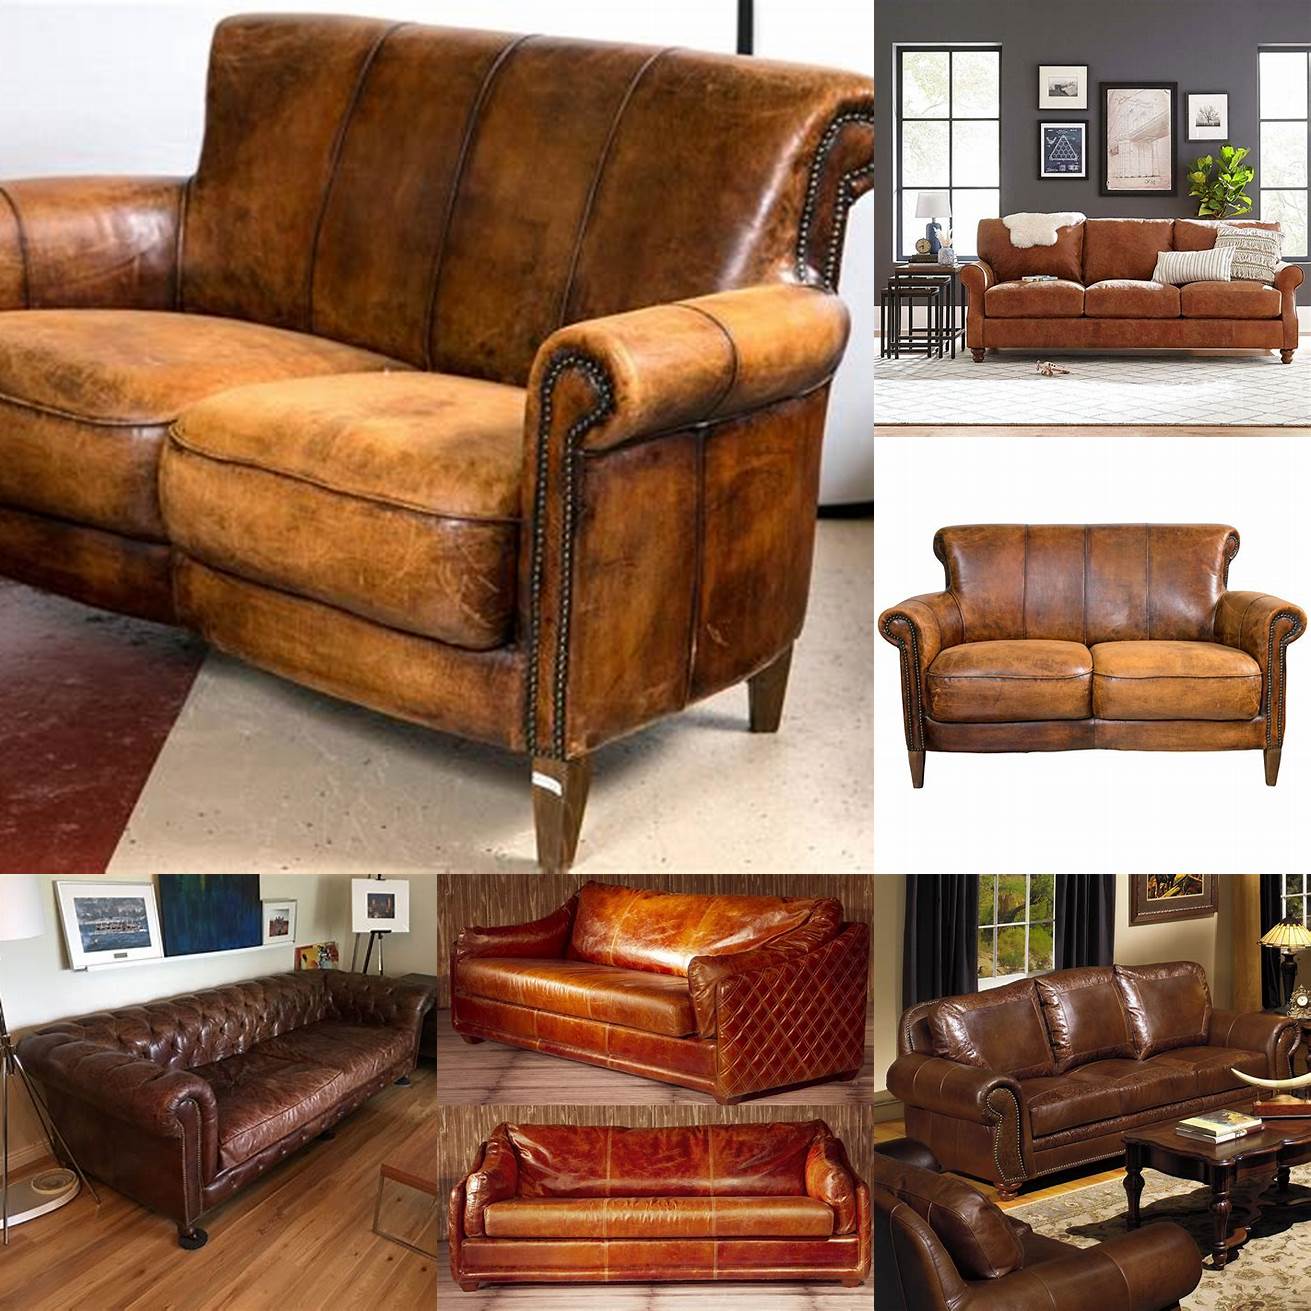 6 Go for a vintage look with a distressed leather sofa